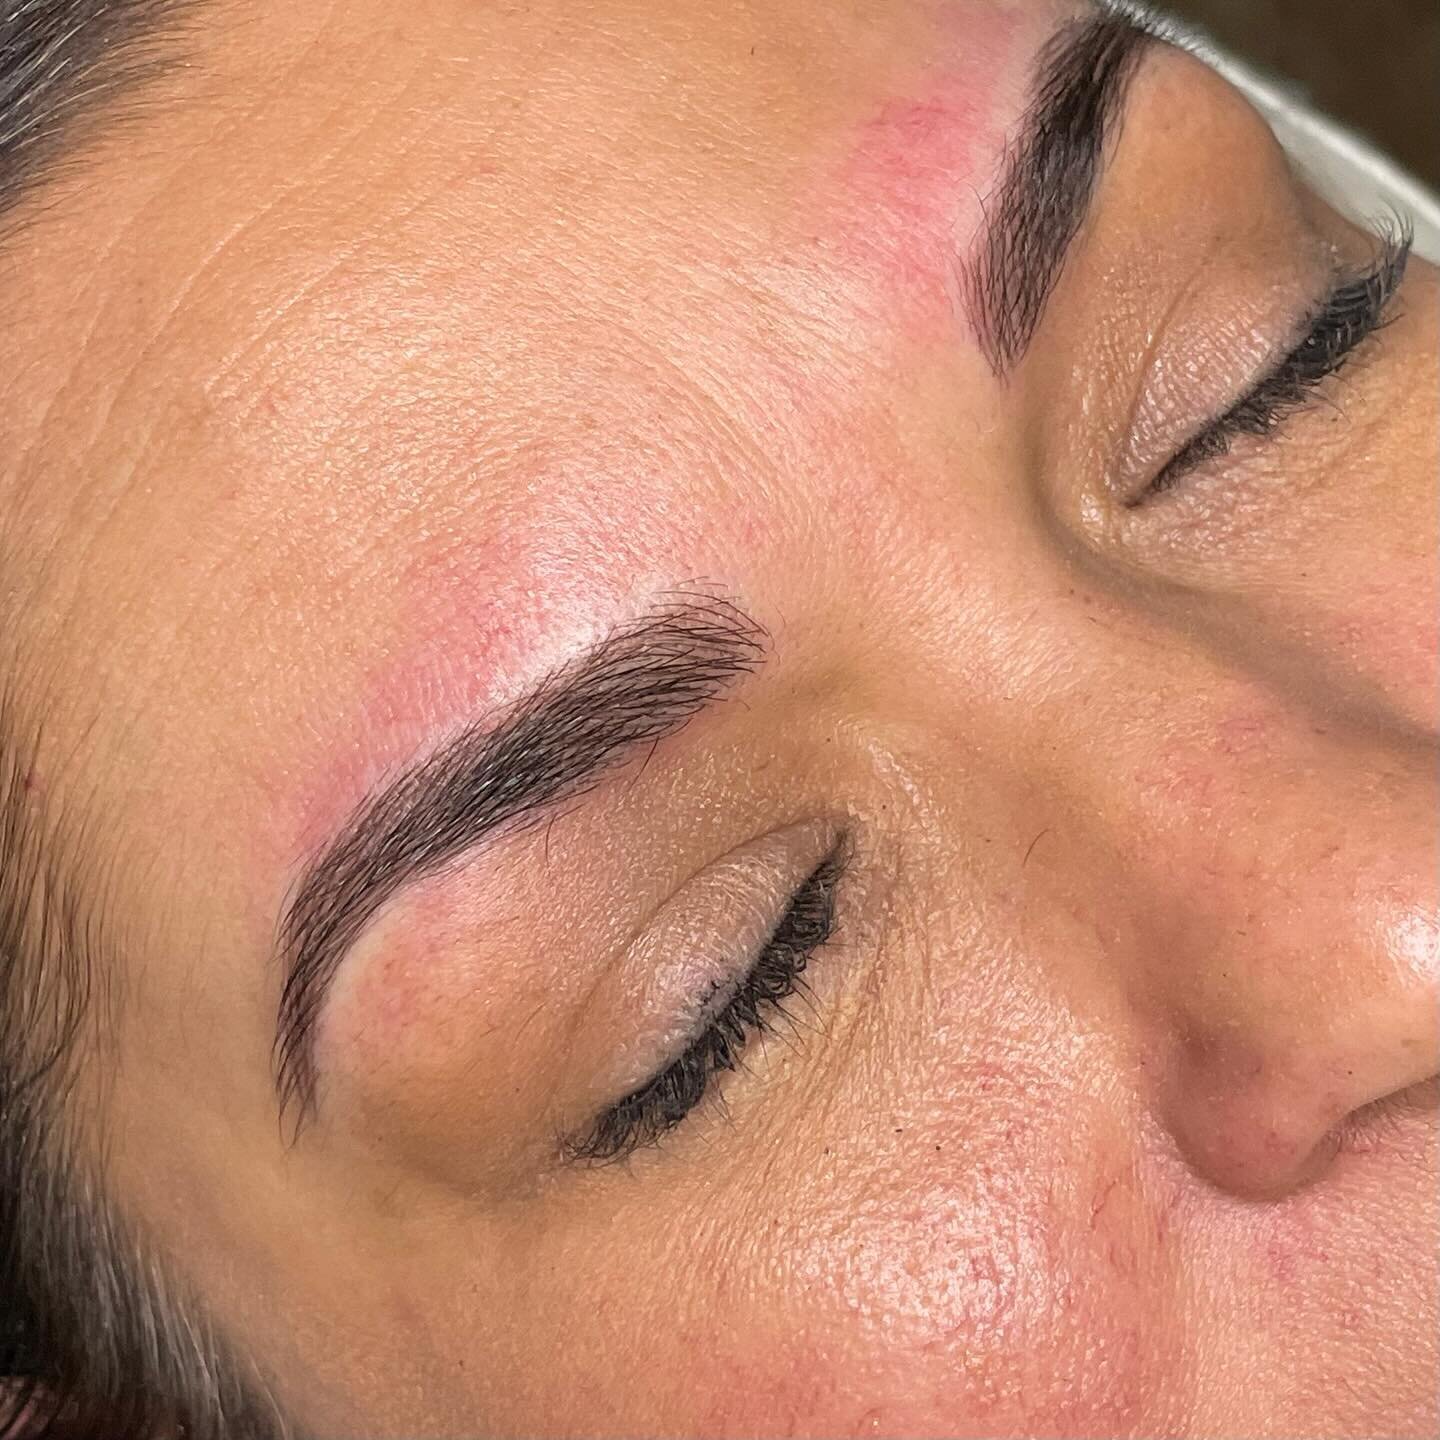 Microbladed hair strokes don&rsquo;t get much crisper than this 😍 perfect brows for years to come! 
&bull;
&bull;
#microblading #microbladingeyebrows #sacramento #permanentmakeup #microbladingsacramento #makeupbymandie